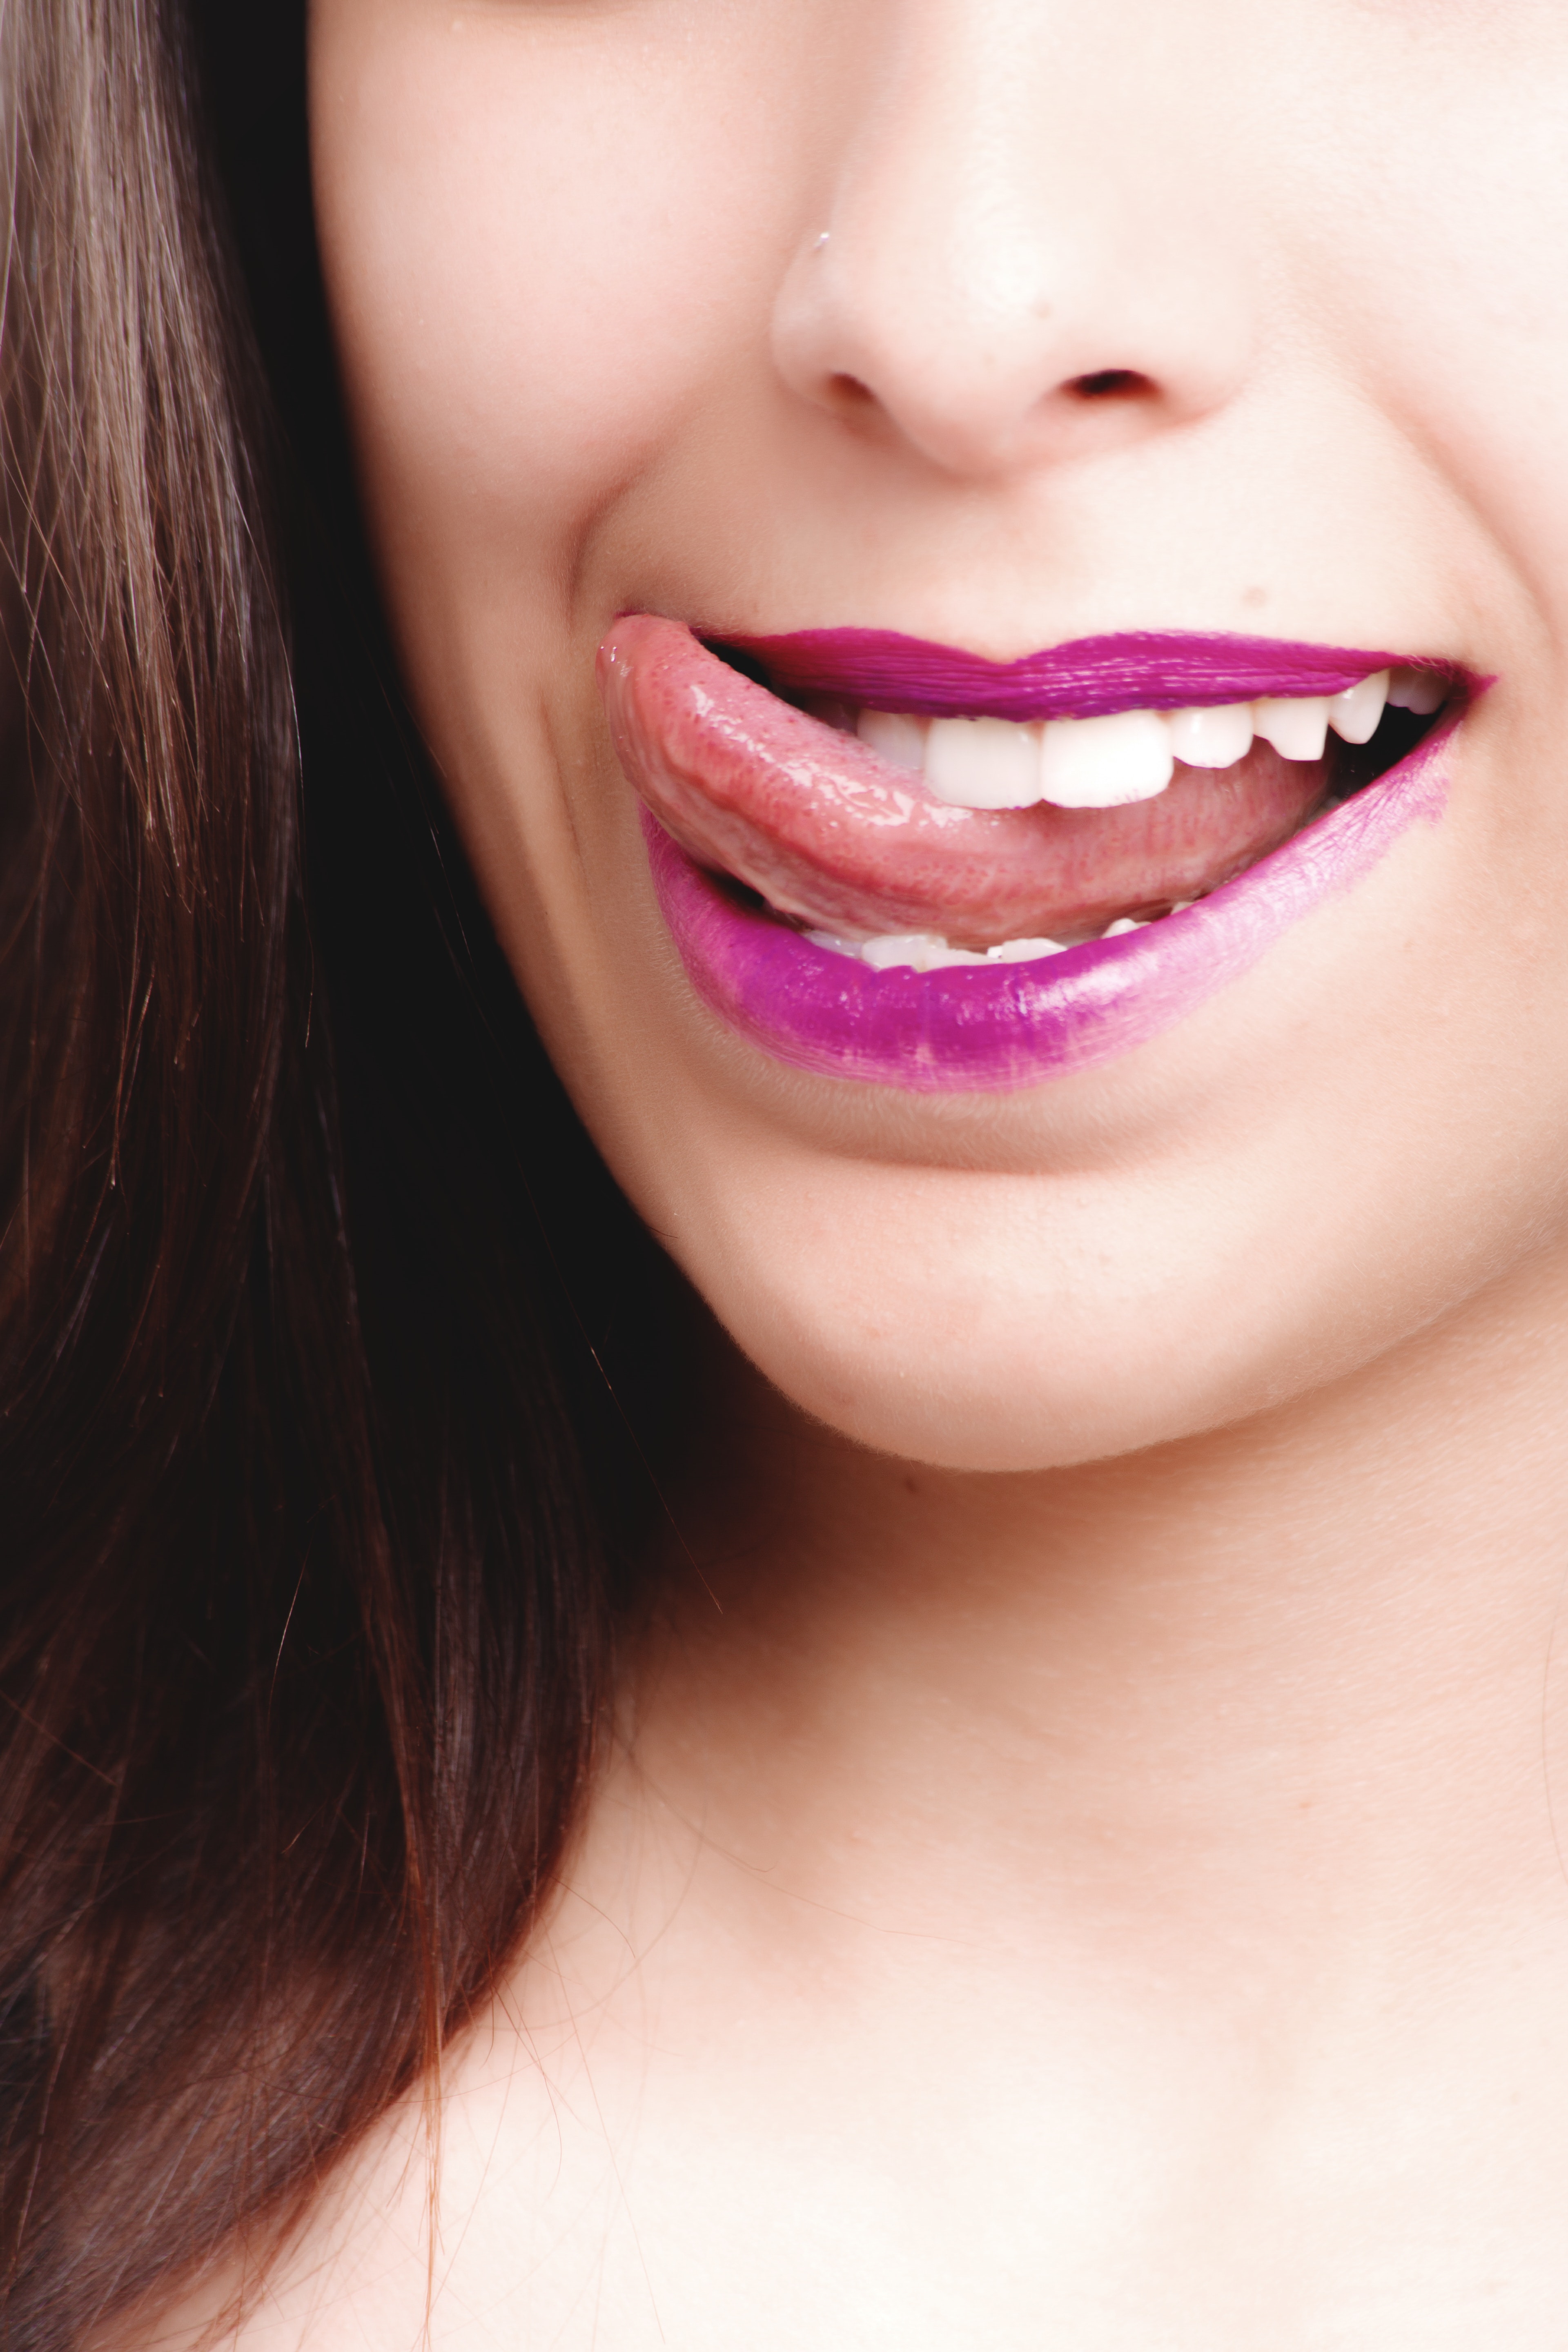 Woman licking with purple lips photo